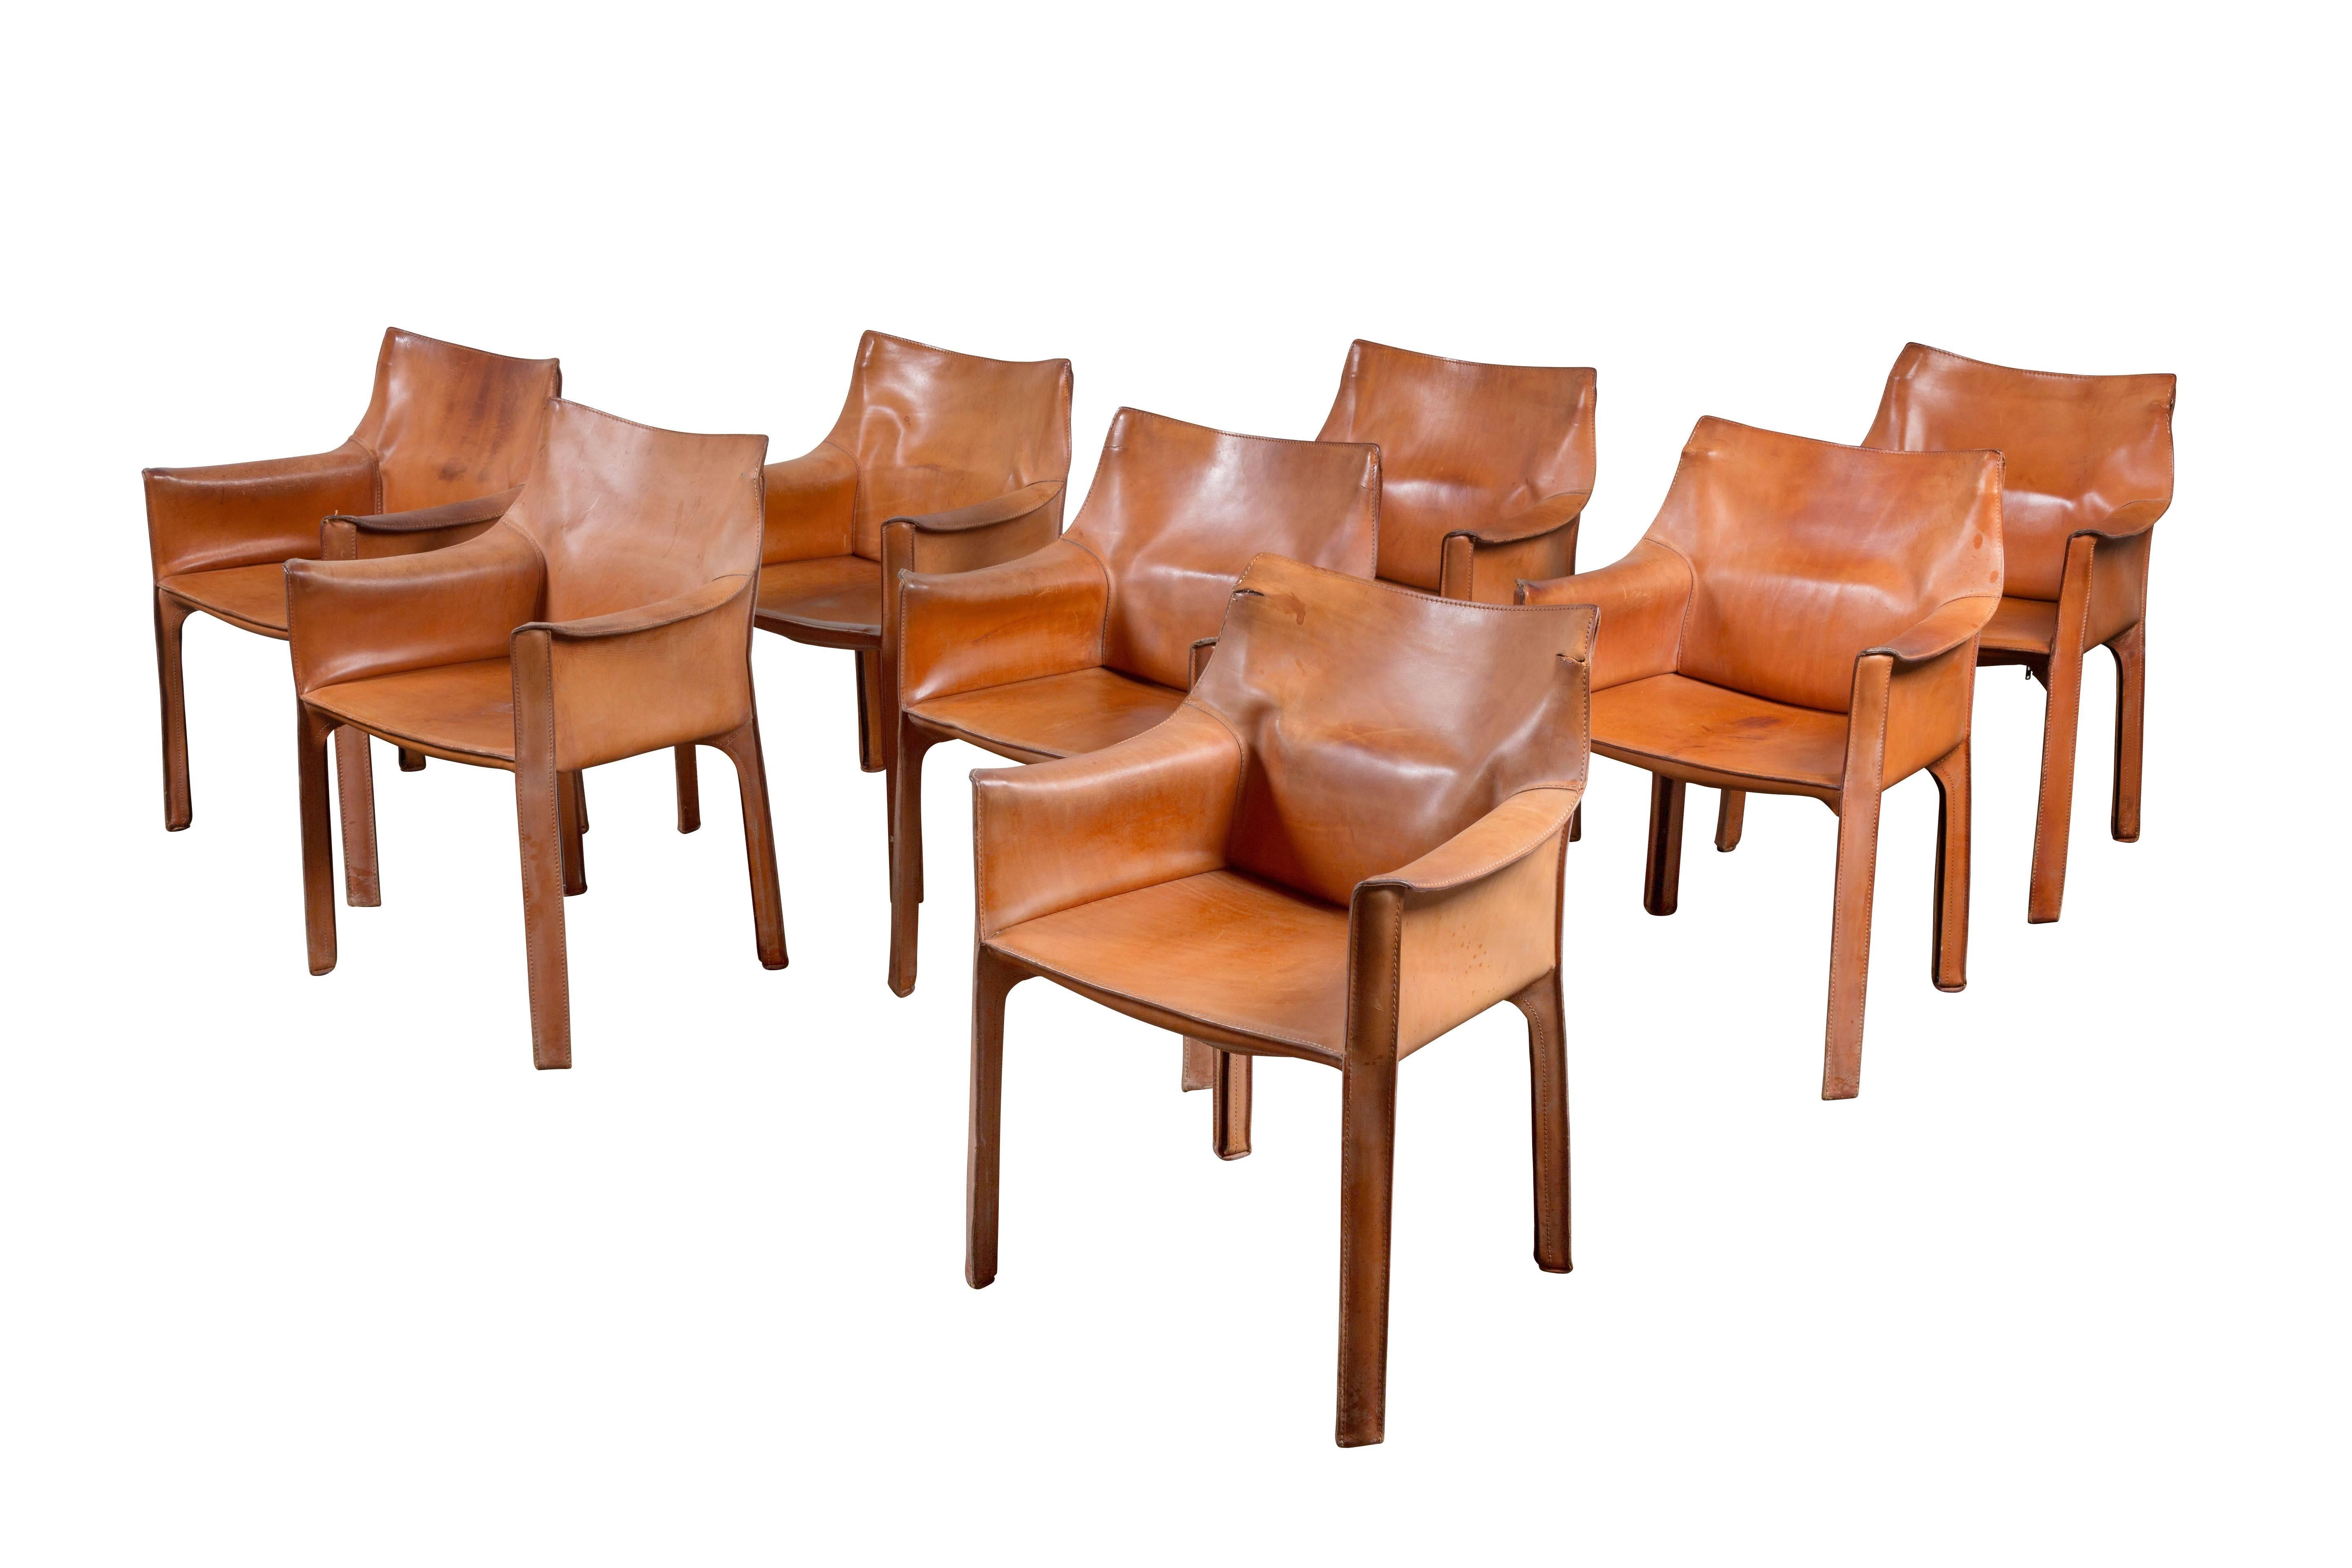 Set of eight Model 413 Cab dining armchairs by Mario Bellini for Cassina. Perfect patina to leather. Made in Italy, circa 1977. 

Part of the MoMA Permanent collection.